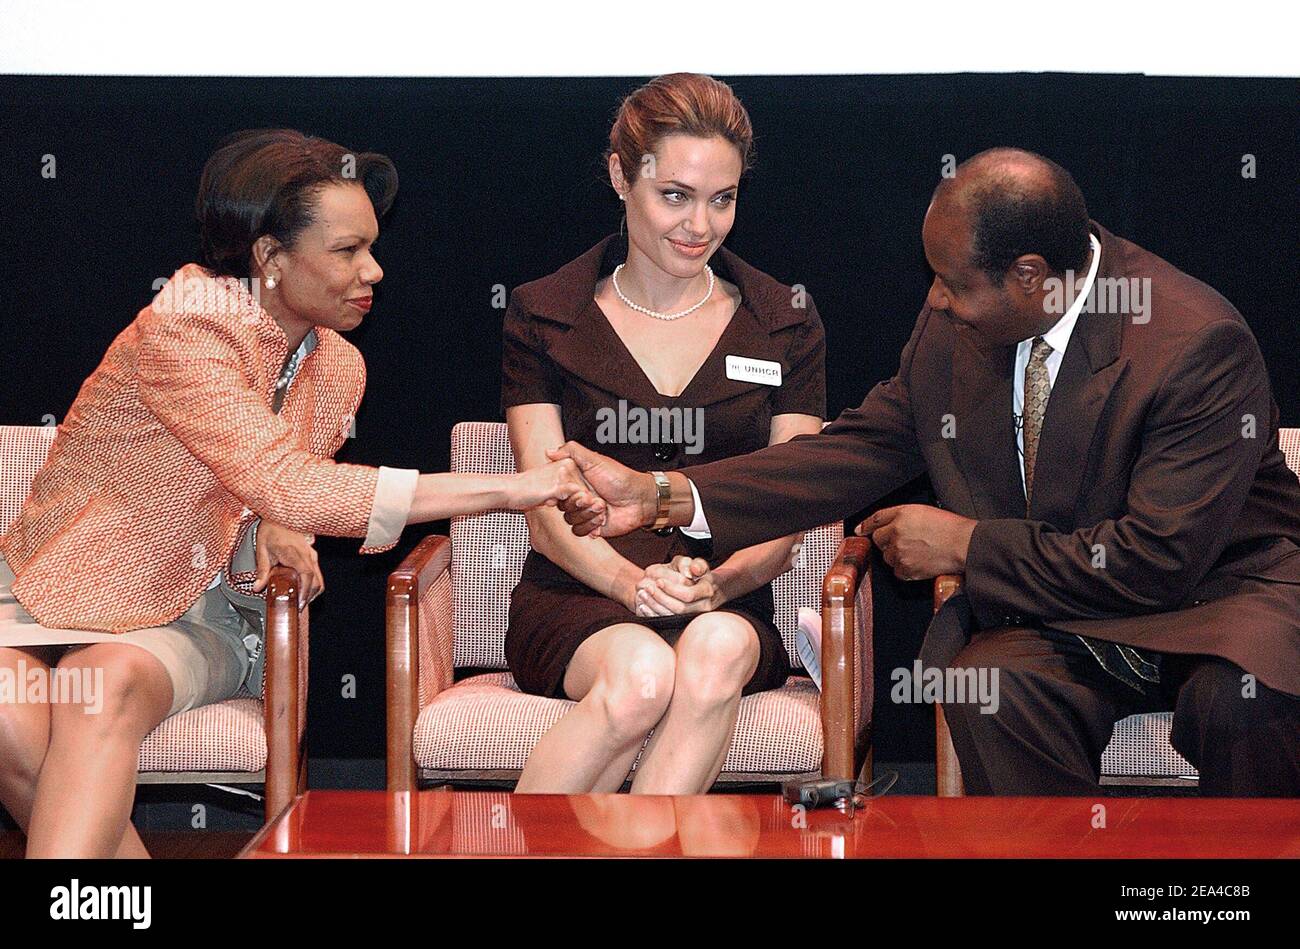 Secretary of State Condoleezza Rice attends an event to commemorate World Refugee Day with Angelina Jolie, actress and United Nations High Commissioner for Refugees goodwill ambassador and refugee speaker Paul Rusesabagina at the National Geographic Museum on June 15, 2005 in Washington, DC, USA. Photo by Olivier Douliery/ABACA. Stock Photo